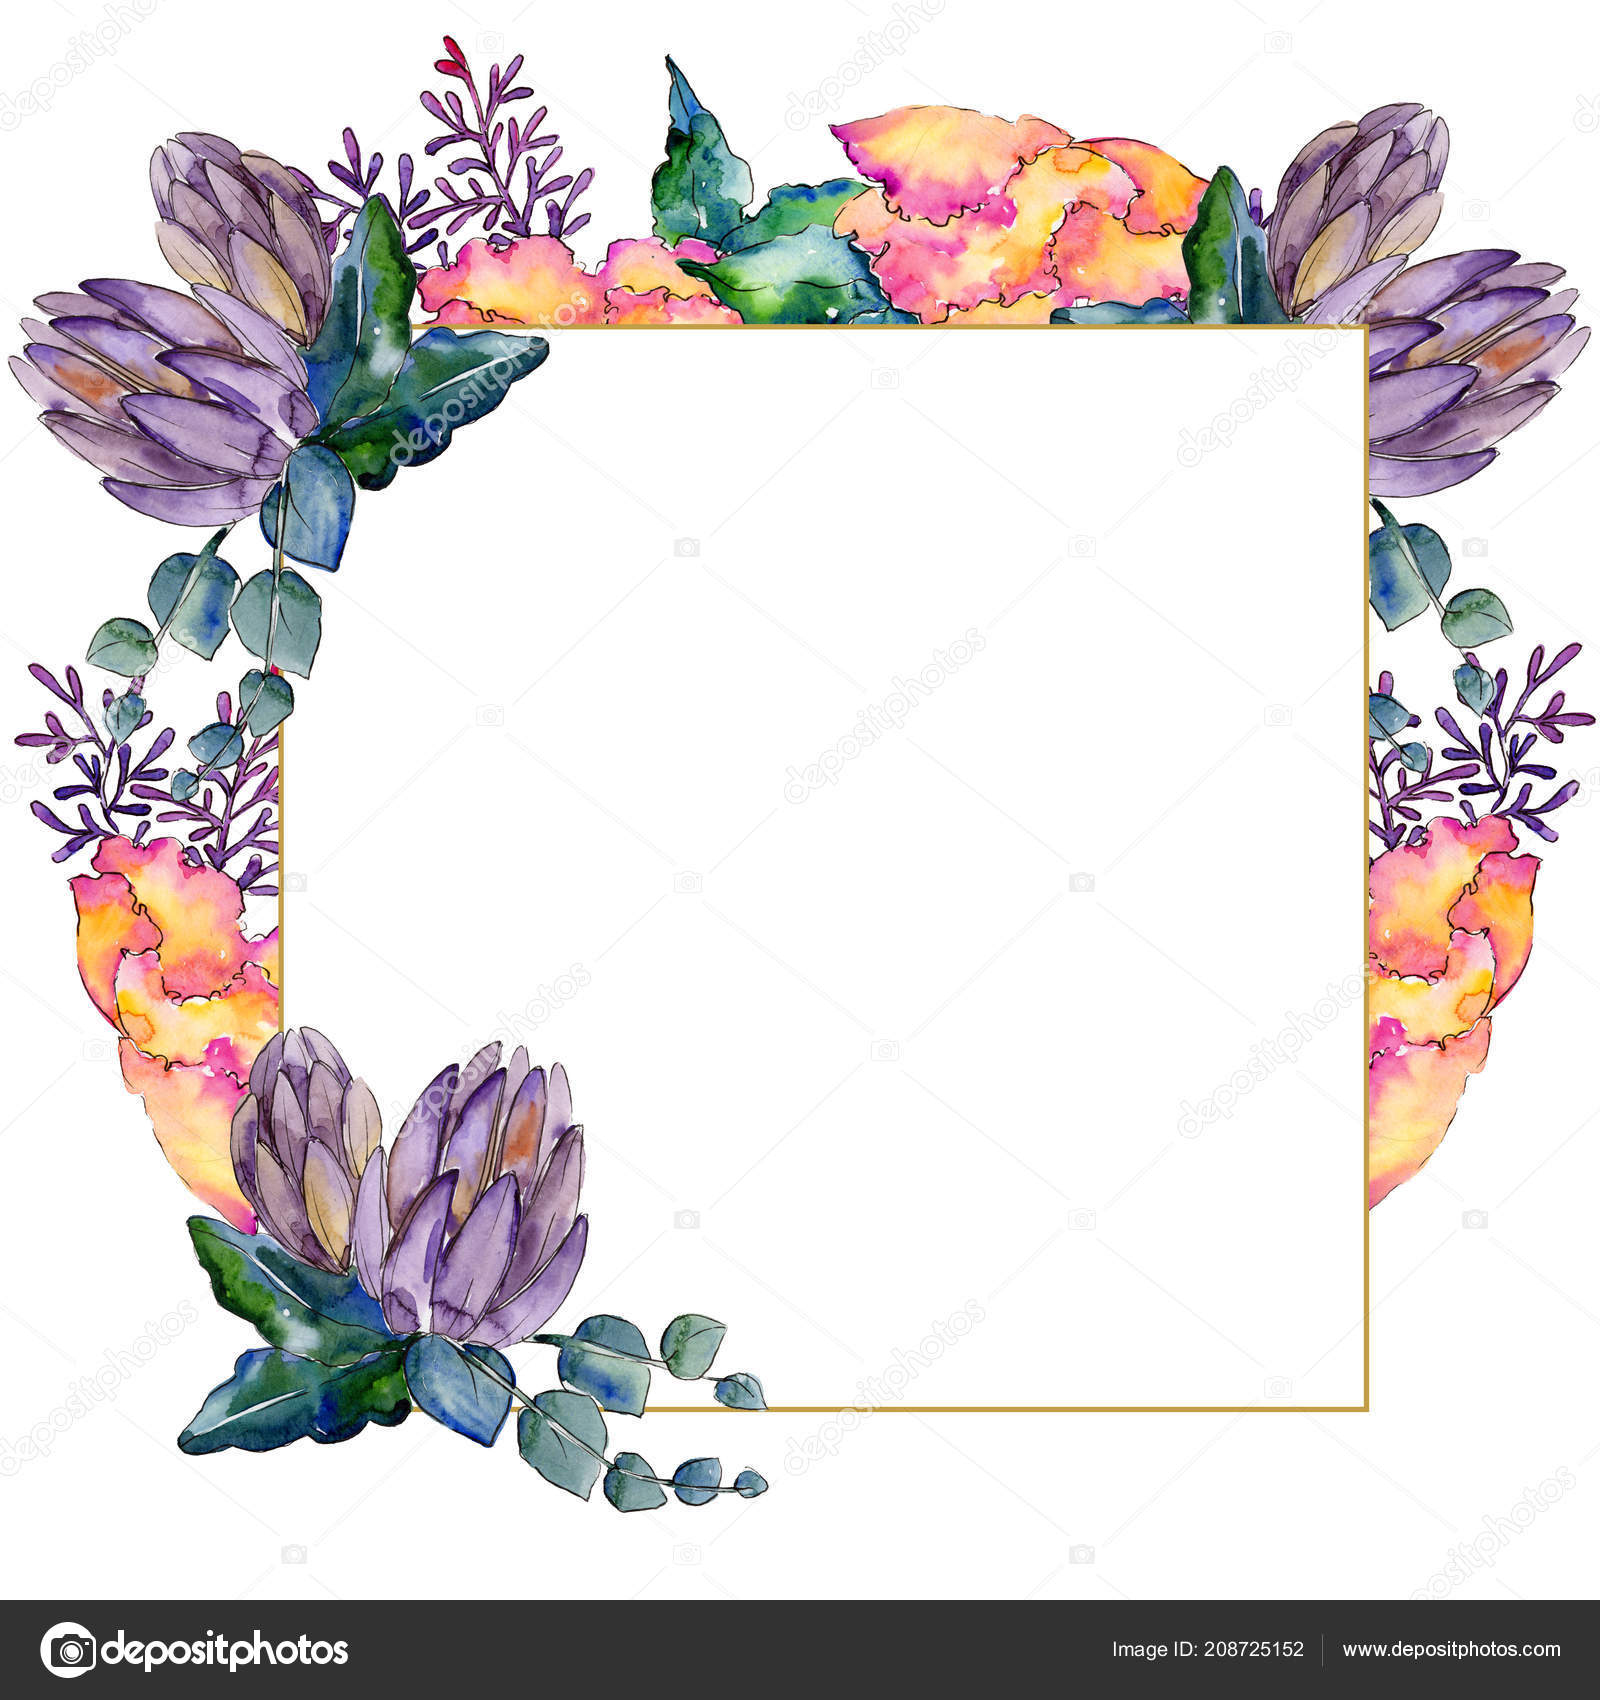 Blue phacelia flower. Watercolor background. Frame floral square